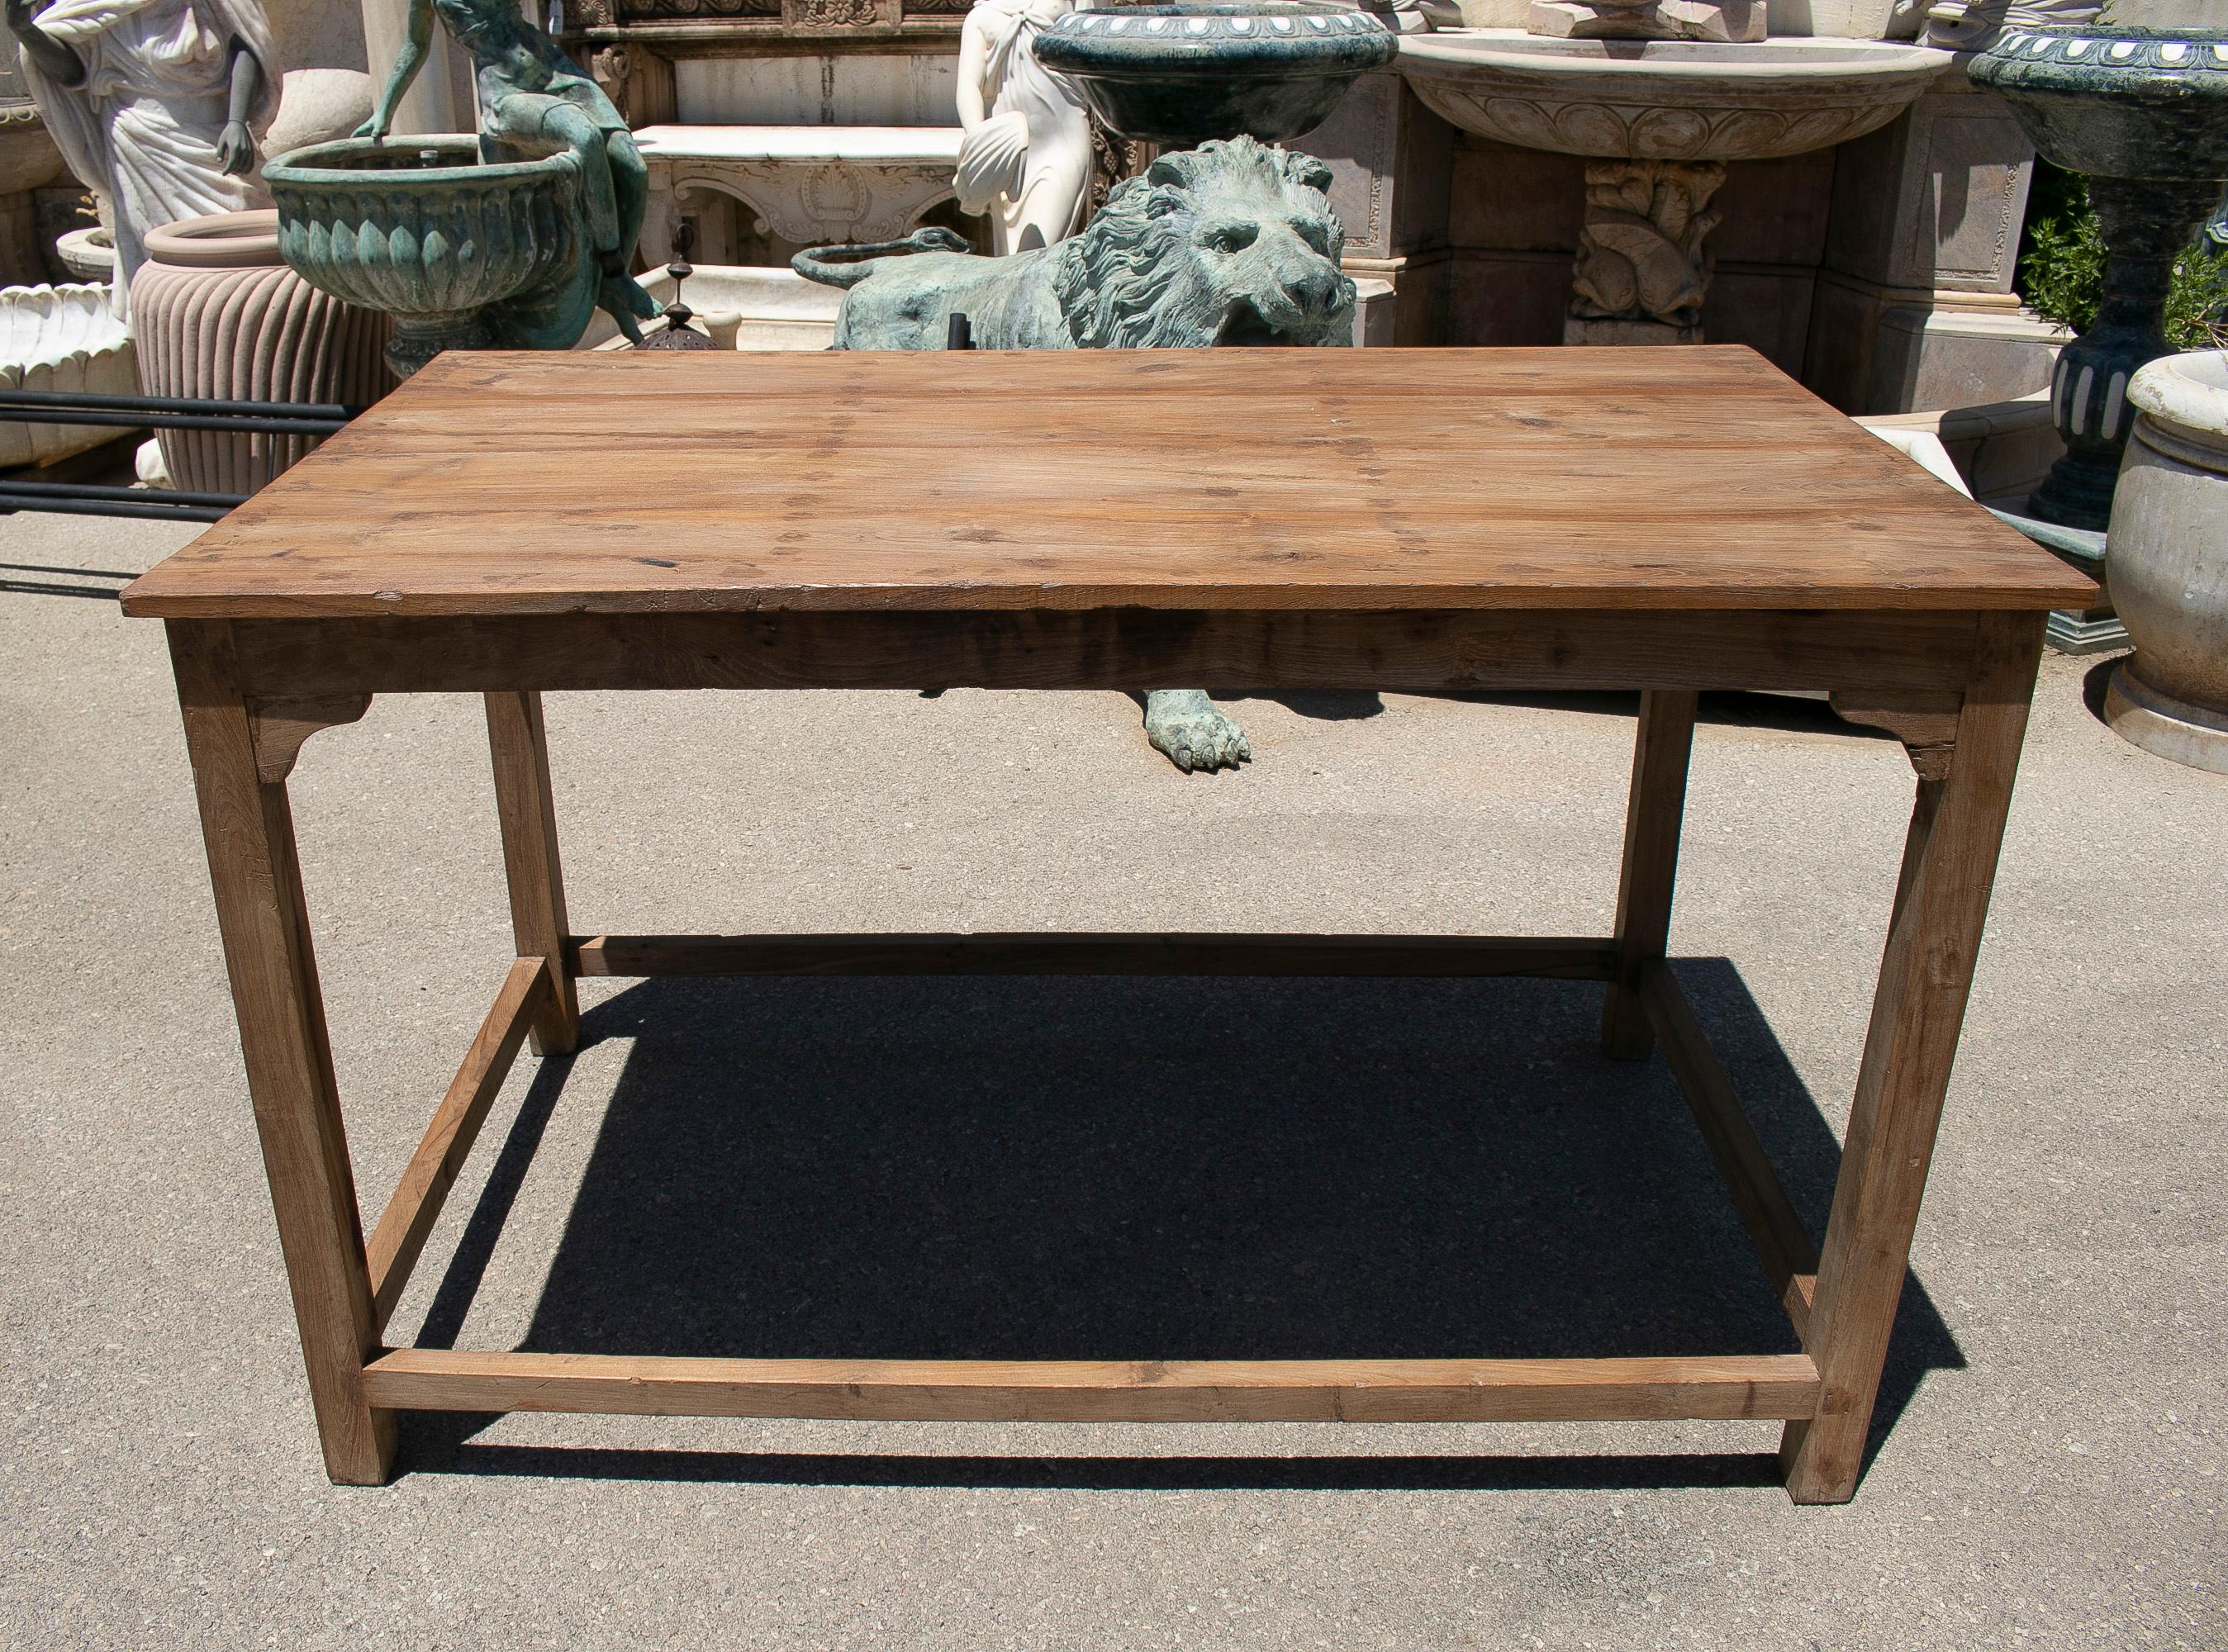 Rustic 1970s Spanish washed wood tailor's working table with crossbeam legs.